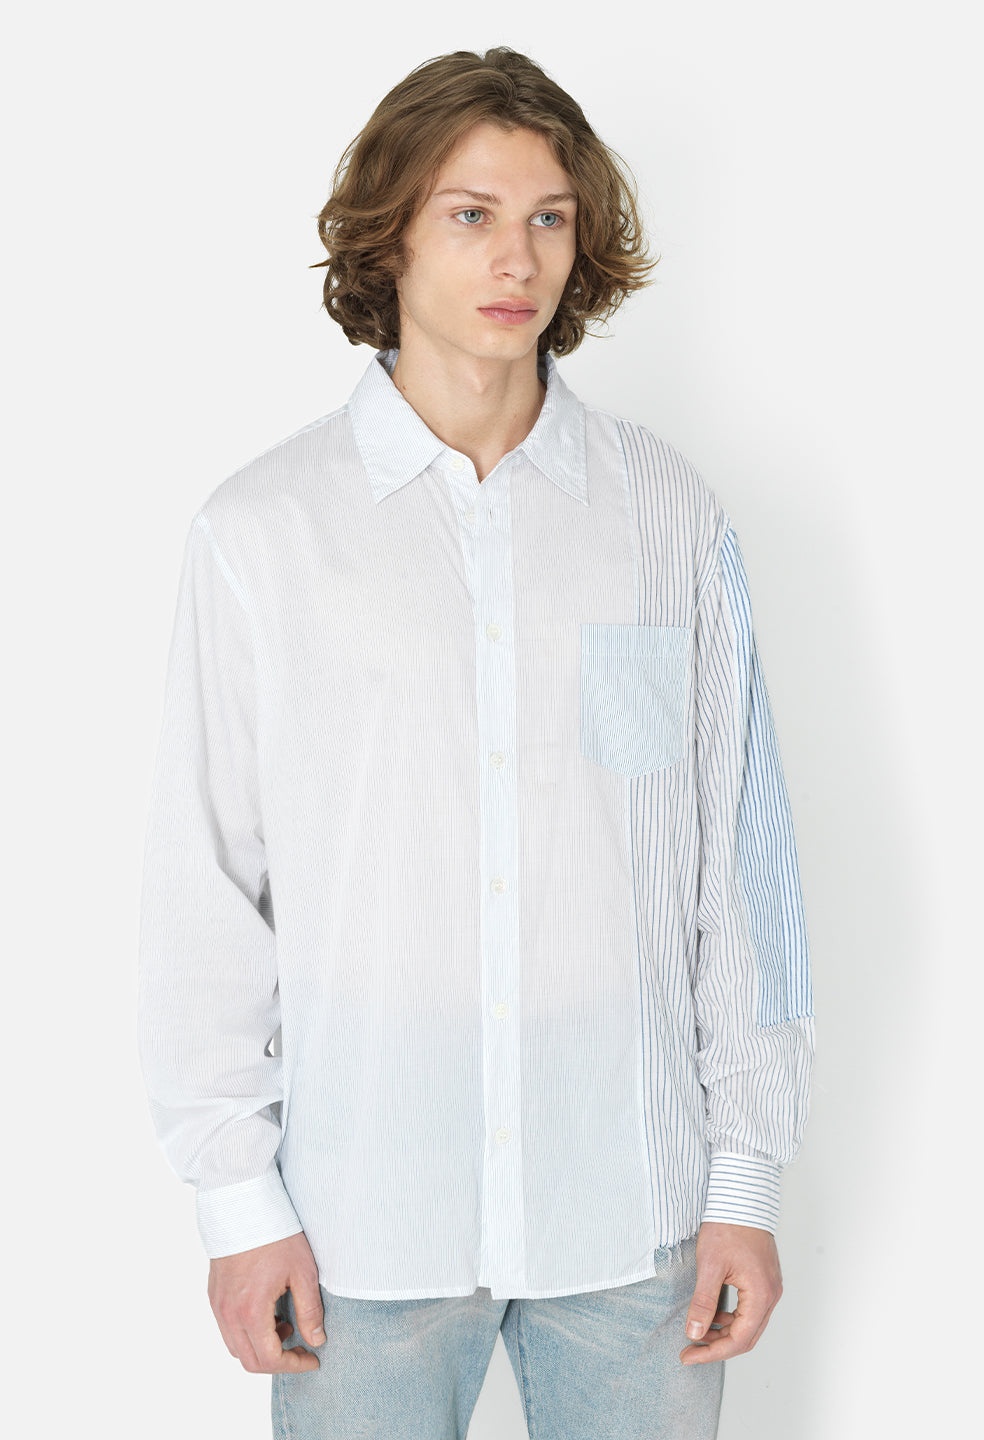 PANELED BUTTON UP - 2